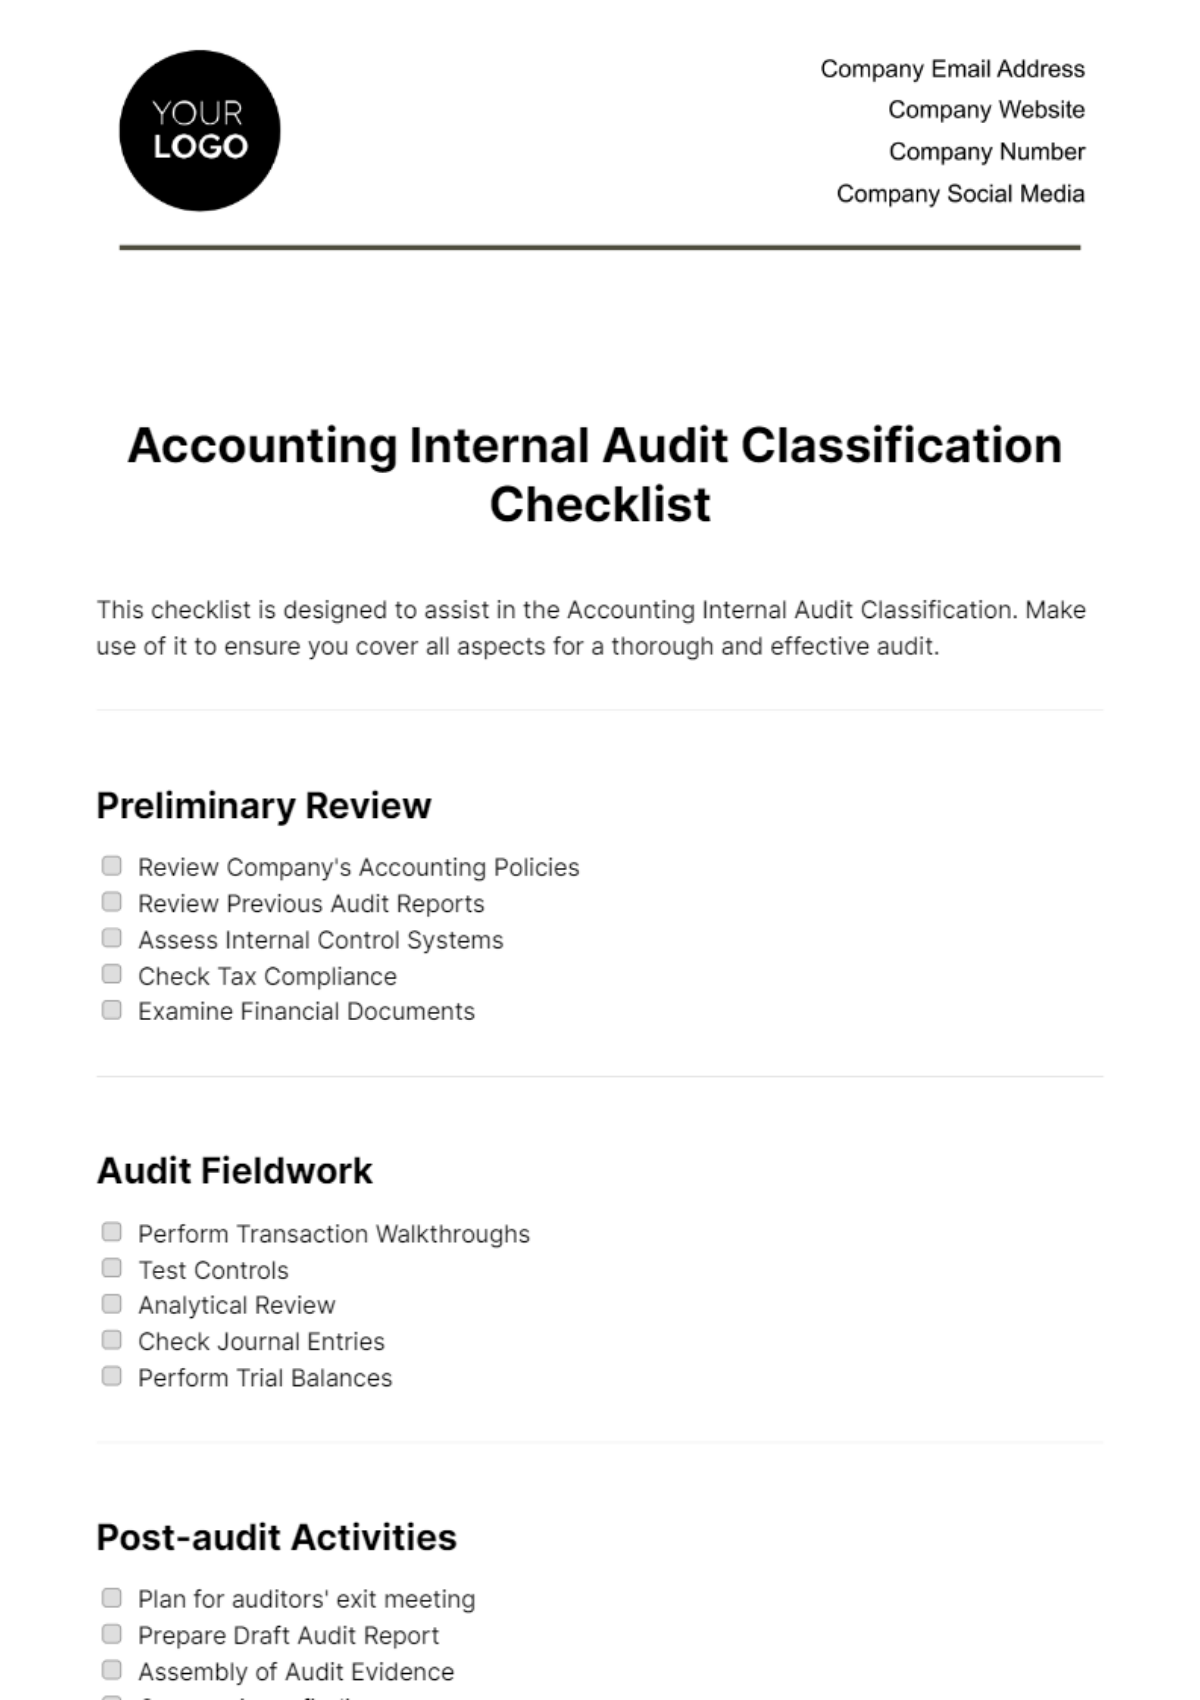 Accounting Internal Audit Classification Checklist Template